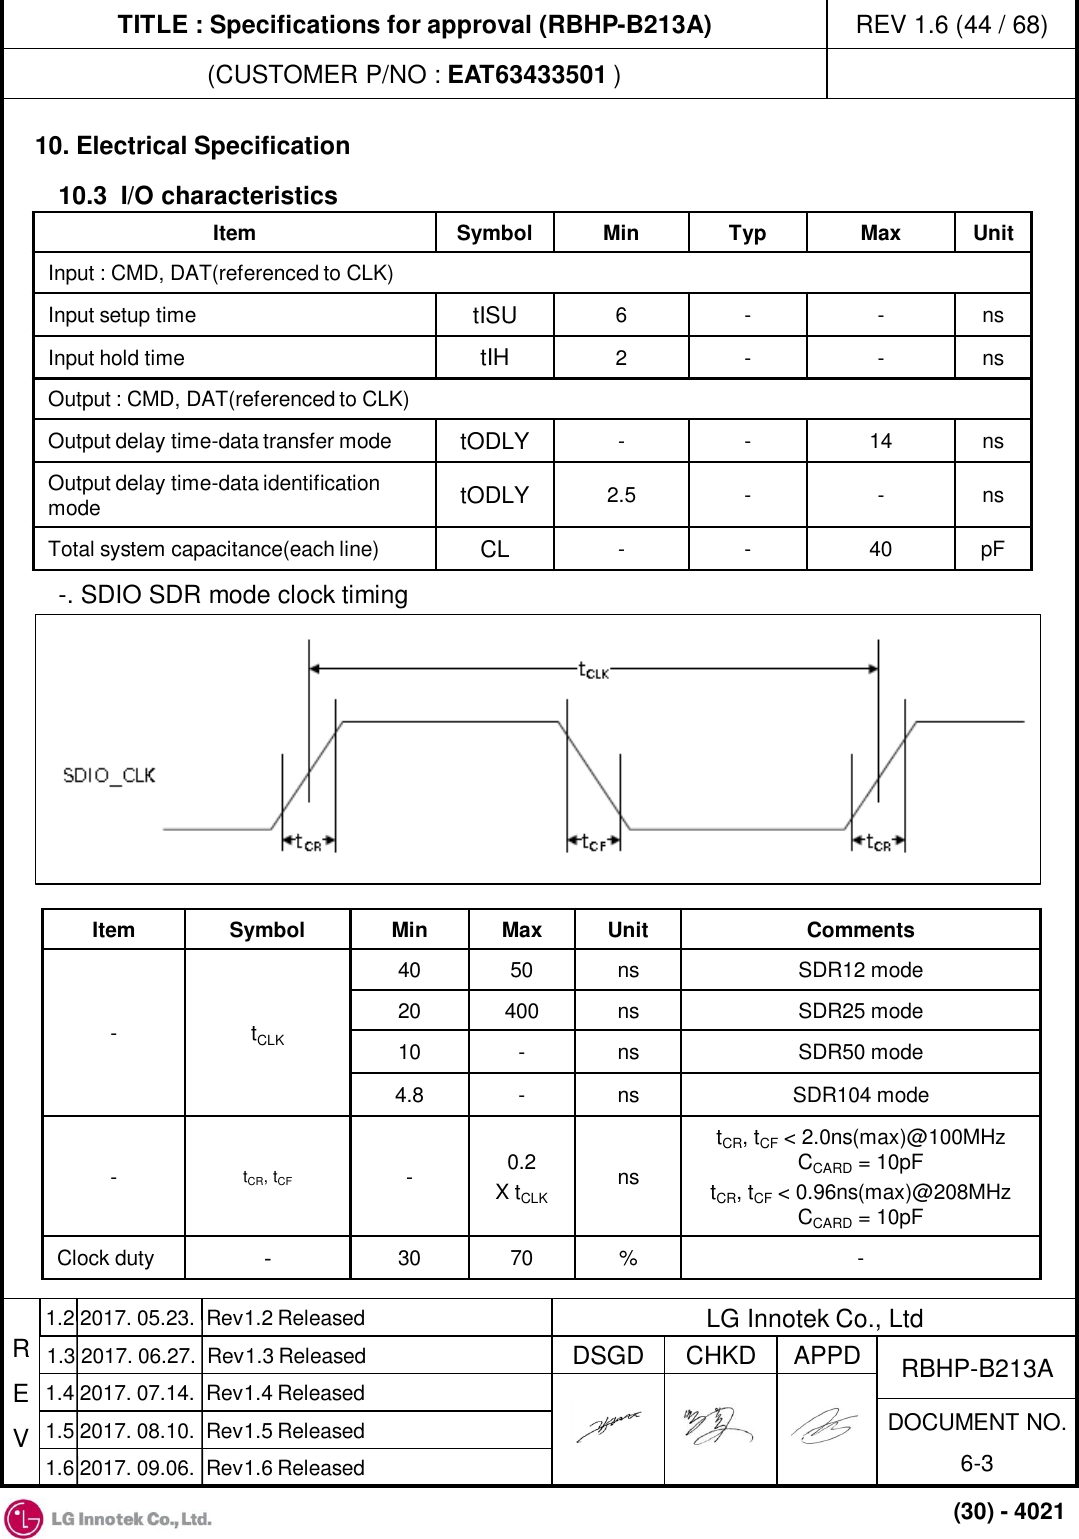 TITLE : Specifications for approval (RBHP-B213A) (CUSTOMER P/NO : EAT63433501 ) REV 1.6 (44 / 68) R E V APPD CHKD DSGD DOCUMENT NO. 6-3 RBHP-B213A LG Innotek Co., Ltd 1.4 2017. 07.14.  Rev1.4 Released 1.5 2017. 08.10.  Rev1.5 Released (30) - 4021 1.2 2017. 05.23.  Rev1.2 Released 1.3 2017. 06.27.  Rev1.3 Released 1.6 2017. 09.06.  Rev1.6 Released Input : CMD, DAT(referenced to CLK) Input setup time  tISU  6  -  -  ns Input hold time  tIH  2  -  -  ns Output : CMD, DAT(referenced to CLK) Output delay time-data transfer mode  tODLY  -  -  14 ns Output delay time-data identification mode  tODLY  2.5  -  -  ns Total system capacitance(each line)  CL -  -  40 pF 10. Electrical Specification 10.3  I/O characteristics  -. SDIO SDR mode clock timing Item  Symbol  Min  Typ  Max  Unit Item  Symbol  Min  Max  Unit  Comments -  tCLK 40 50 ns  SDR12 mode 20 400 ns  SDR25 mode 10  -  ns  SDR50 mode 4.8  -  ns  SDR104 mode -  tCR, tCF -  0.2 X tCLK ns tCR, tCF &lt; 2.0ns(max)@100MHz CCARD = 10pF tCR, tCF &lt; 0.96ns(max)@208MHz CCARD = 10pF Clock duty  -  30 70  %  - 